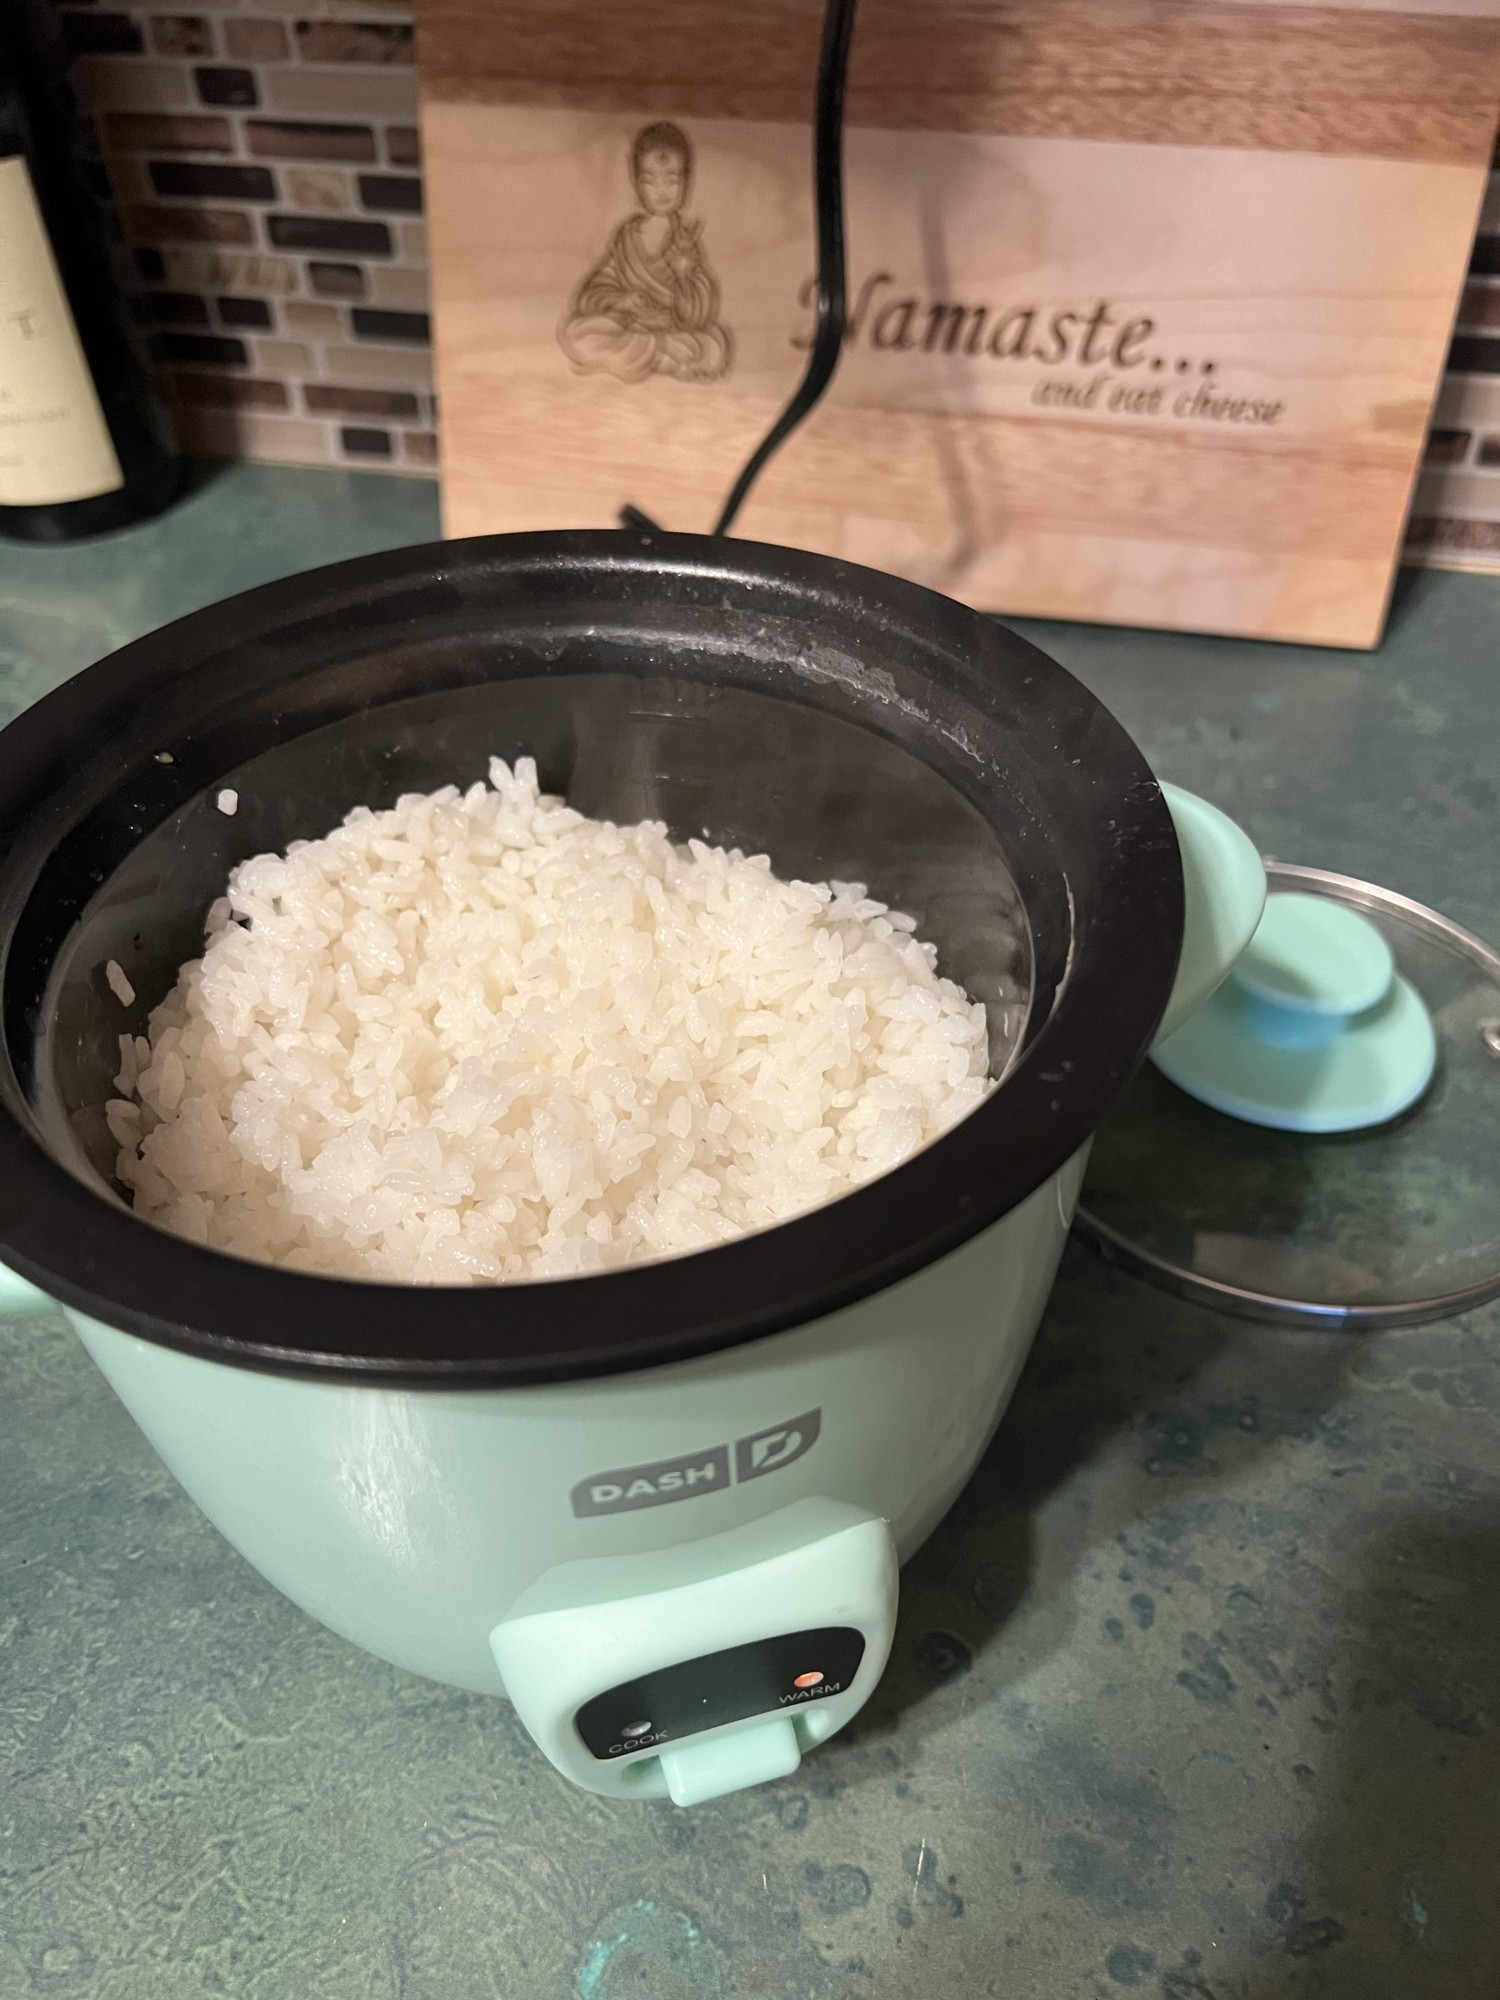 This adorable Dash Mini rice cooker could become your new favorite